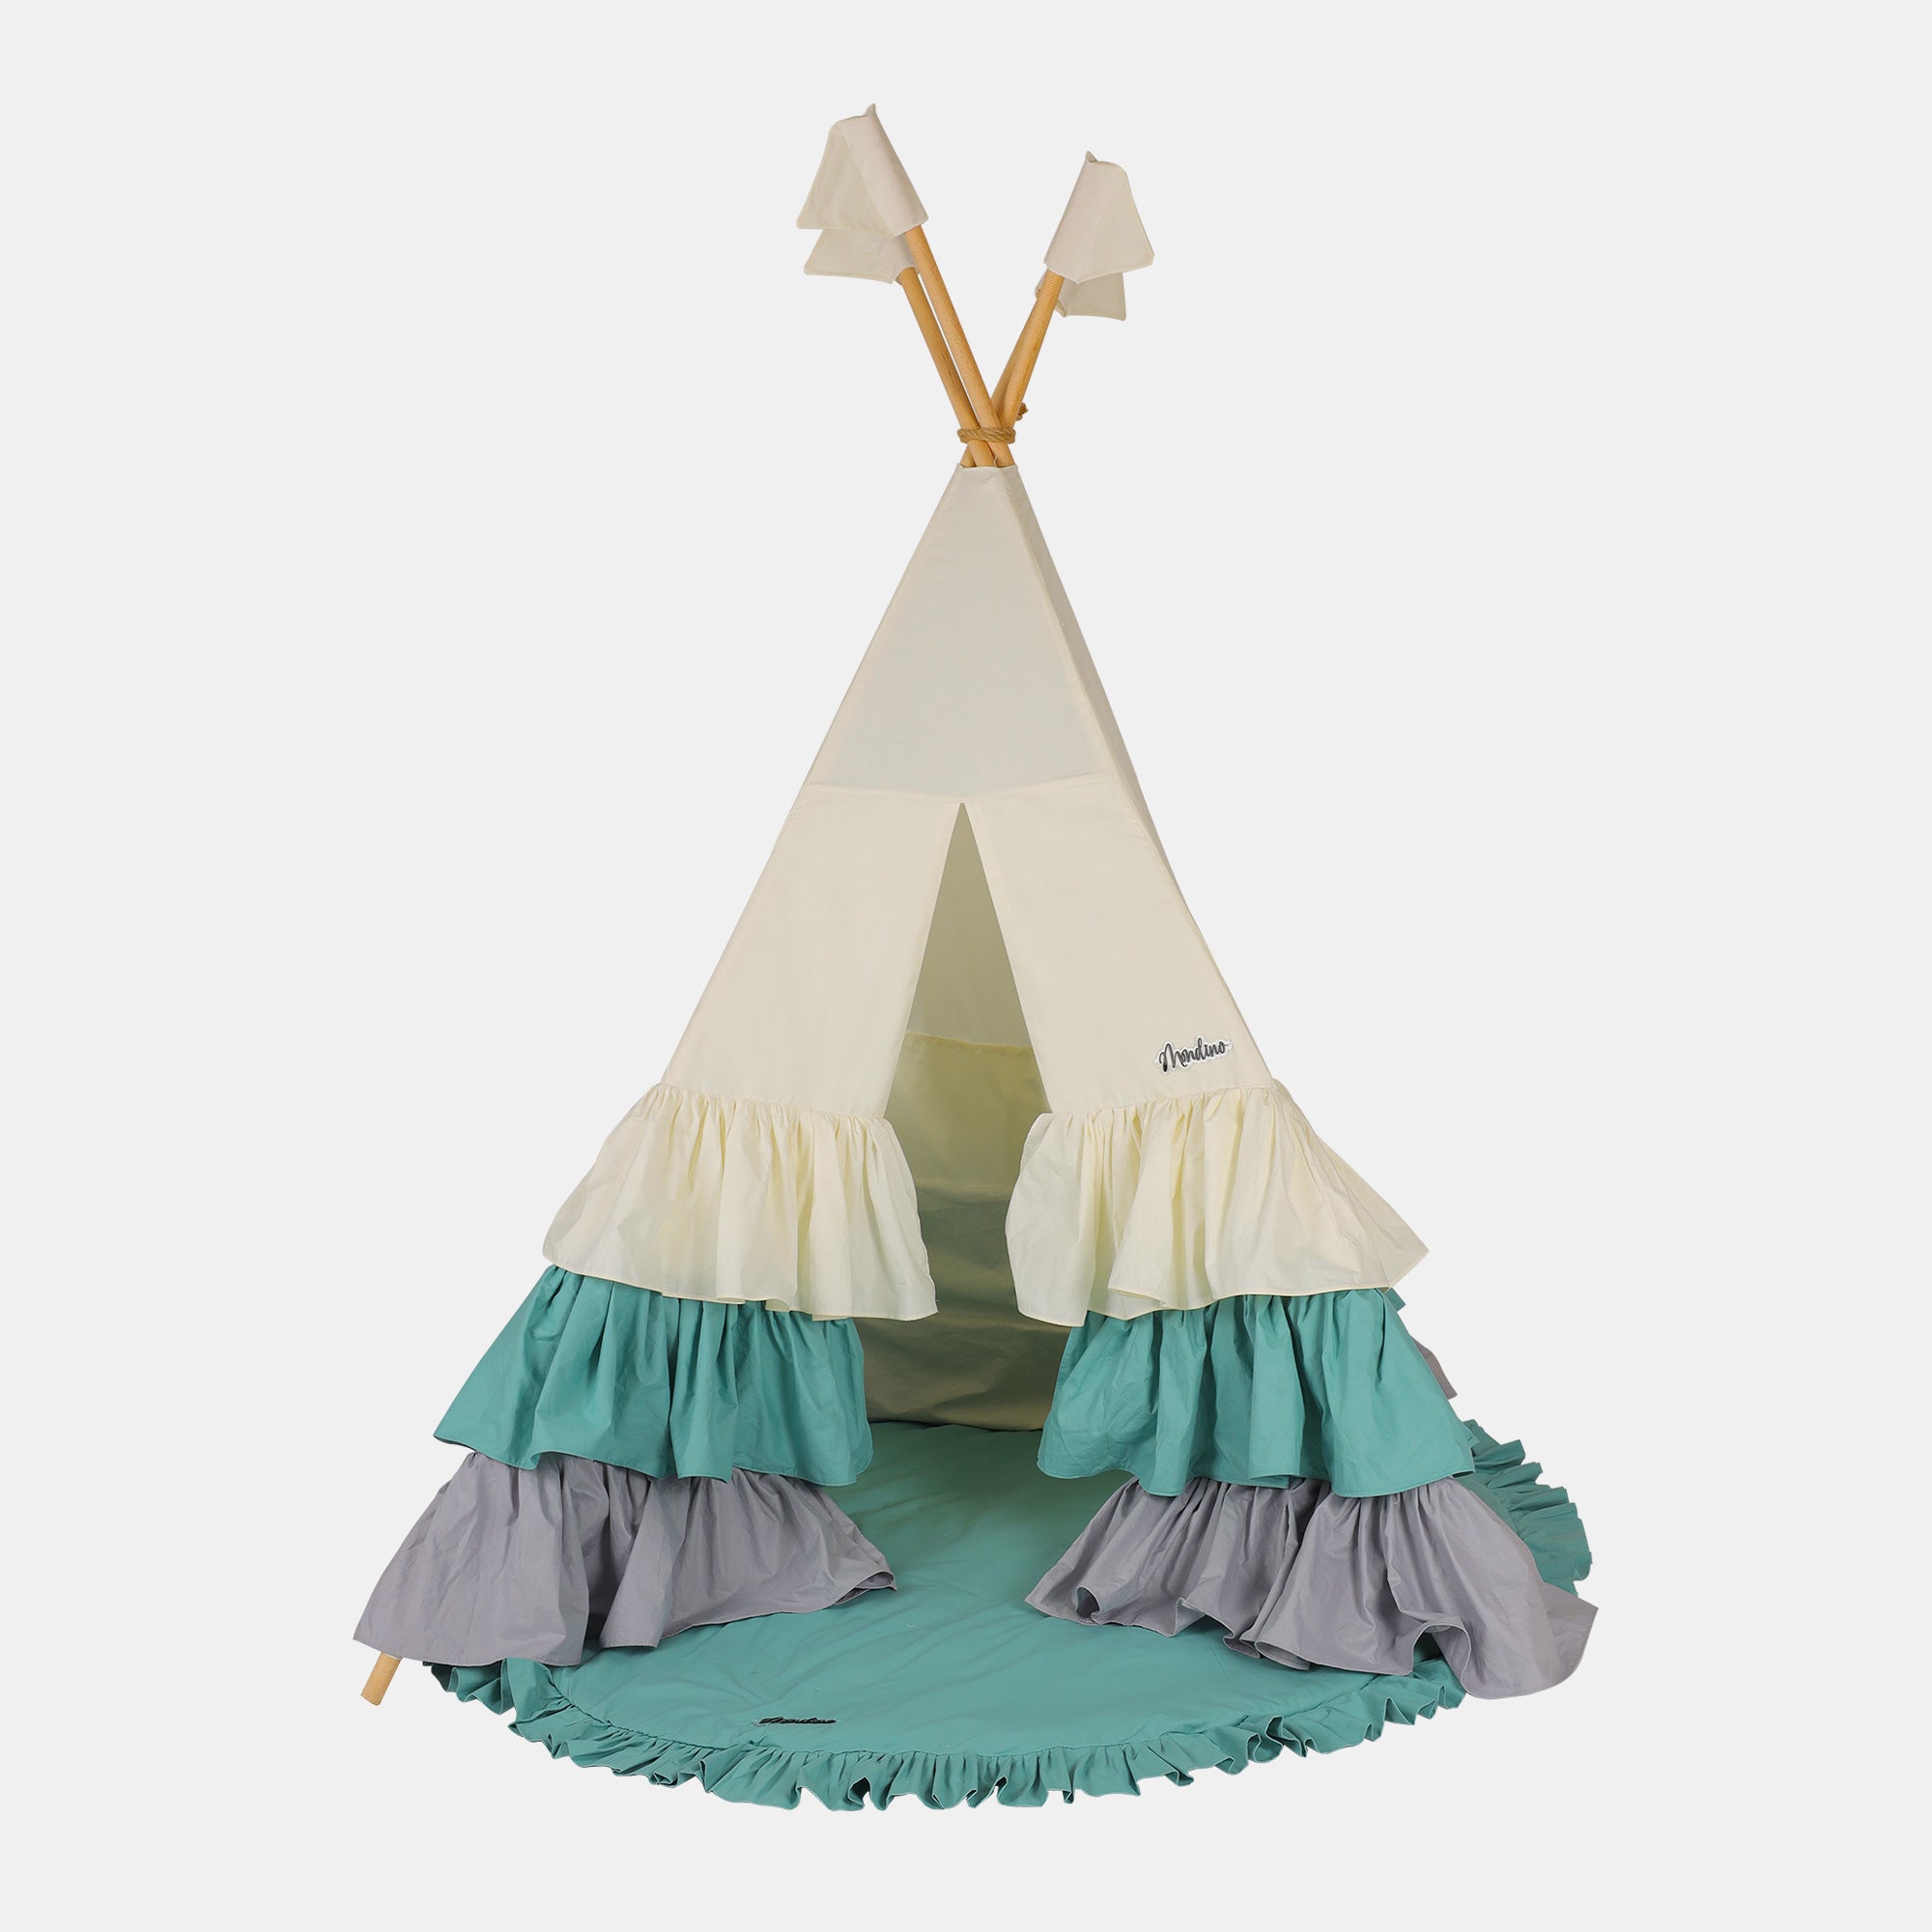 Pacific children's set: Pacific Ocean Style Teepee